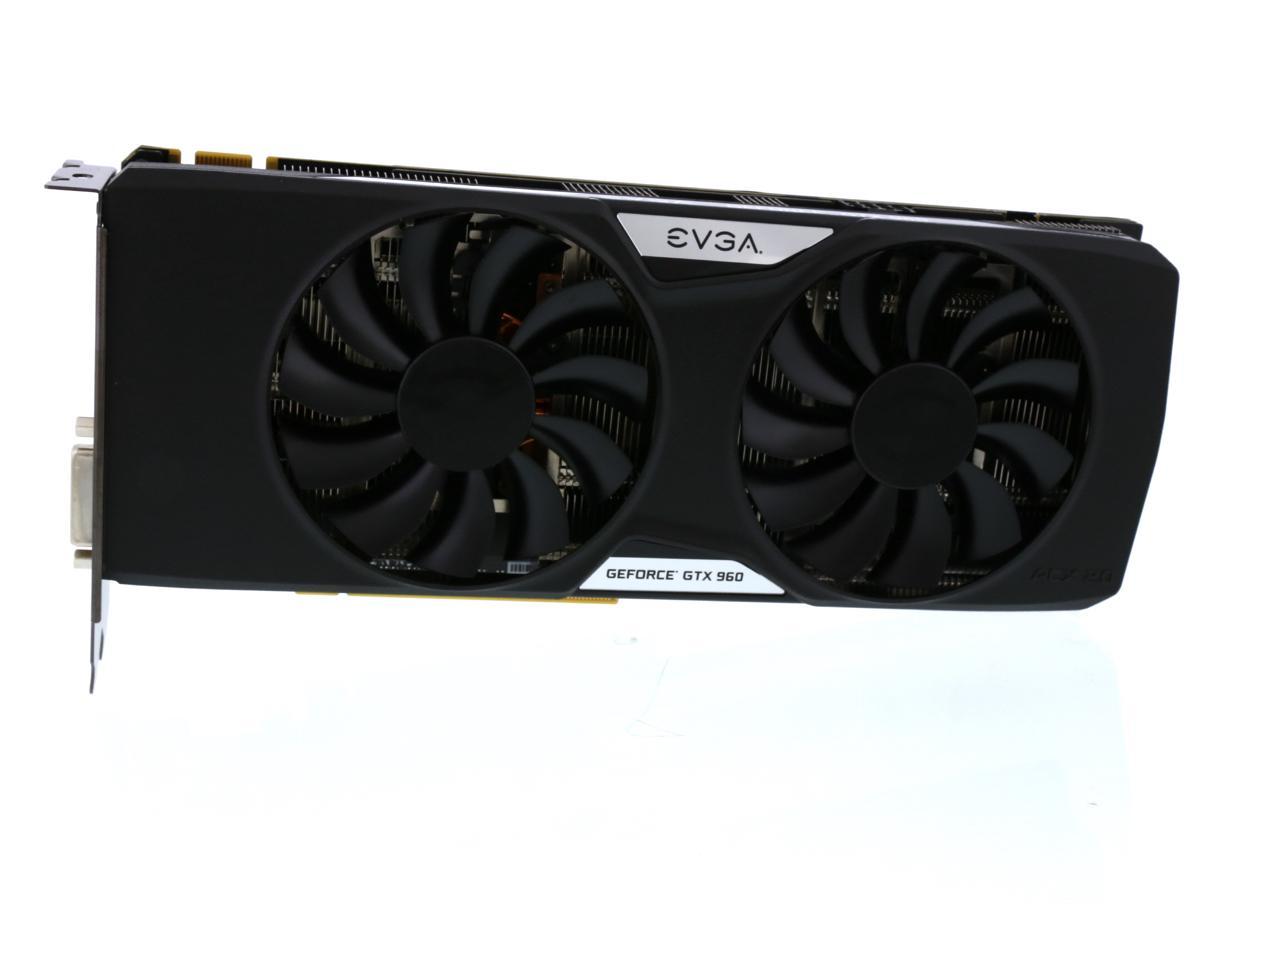 Evga Geforce Gtx 960 04g P4 3967 Kr 4gb Ssc Gaming W Acx 2 0 Whisper Silent Cooling W Free Installed Backplate Graphics Card Newegg Com